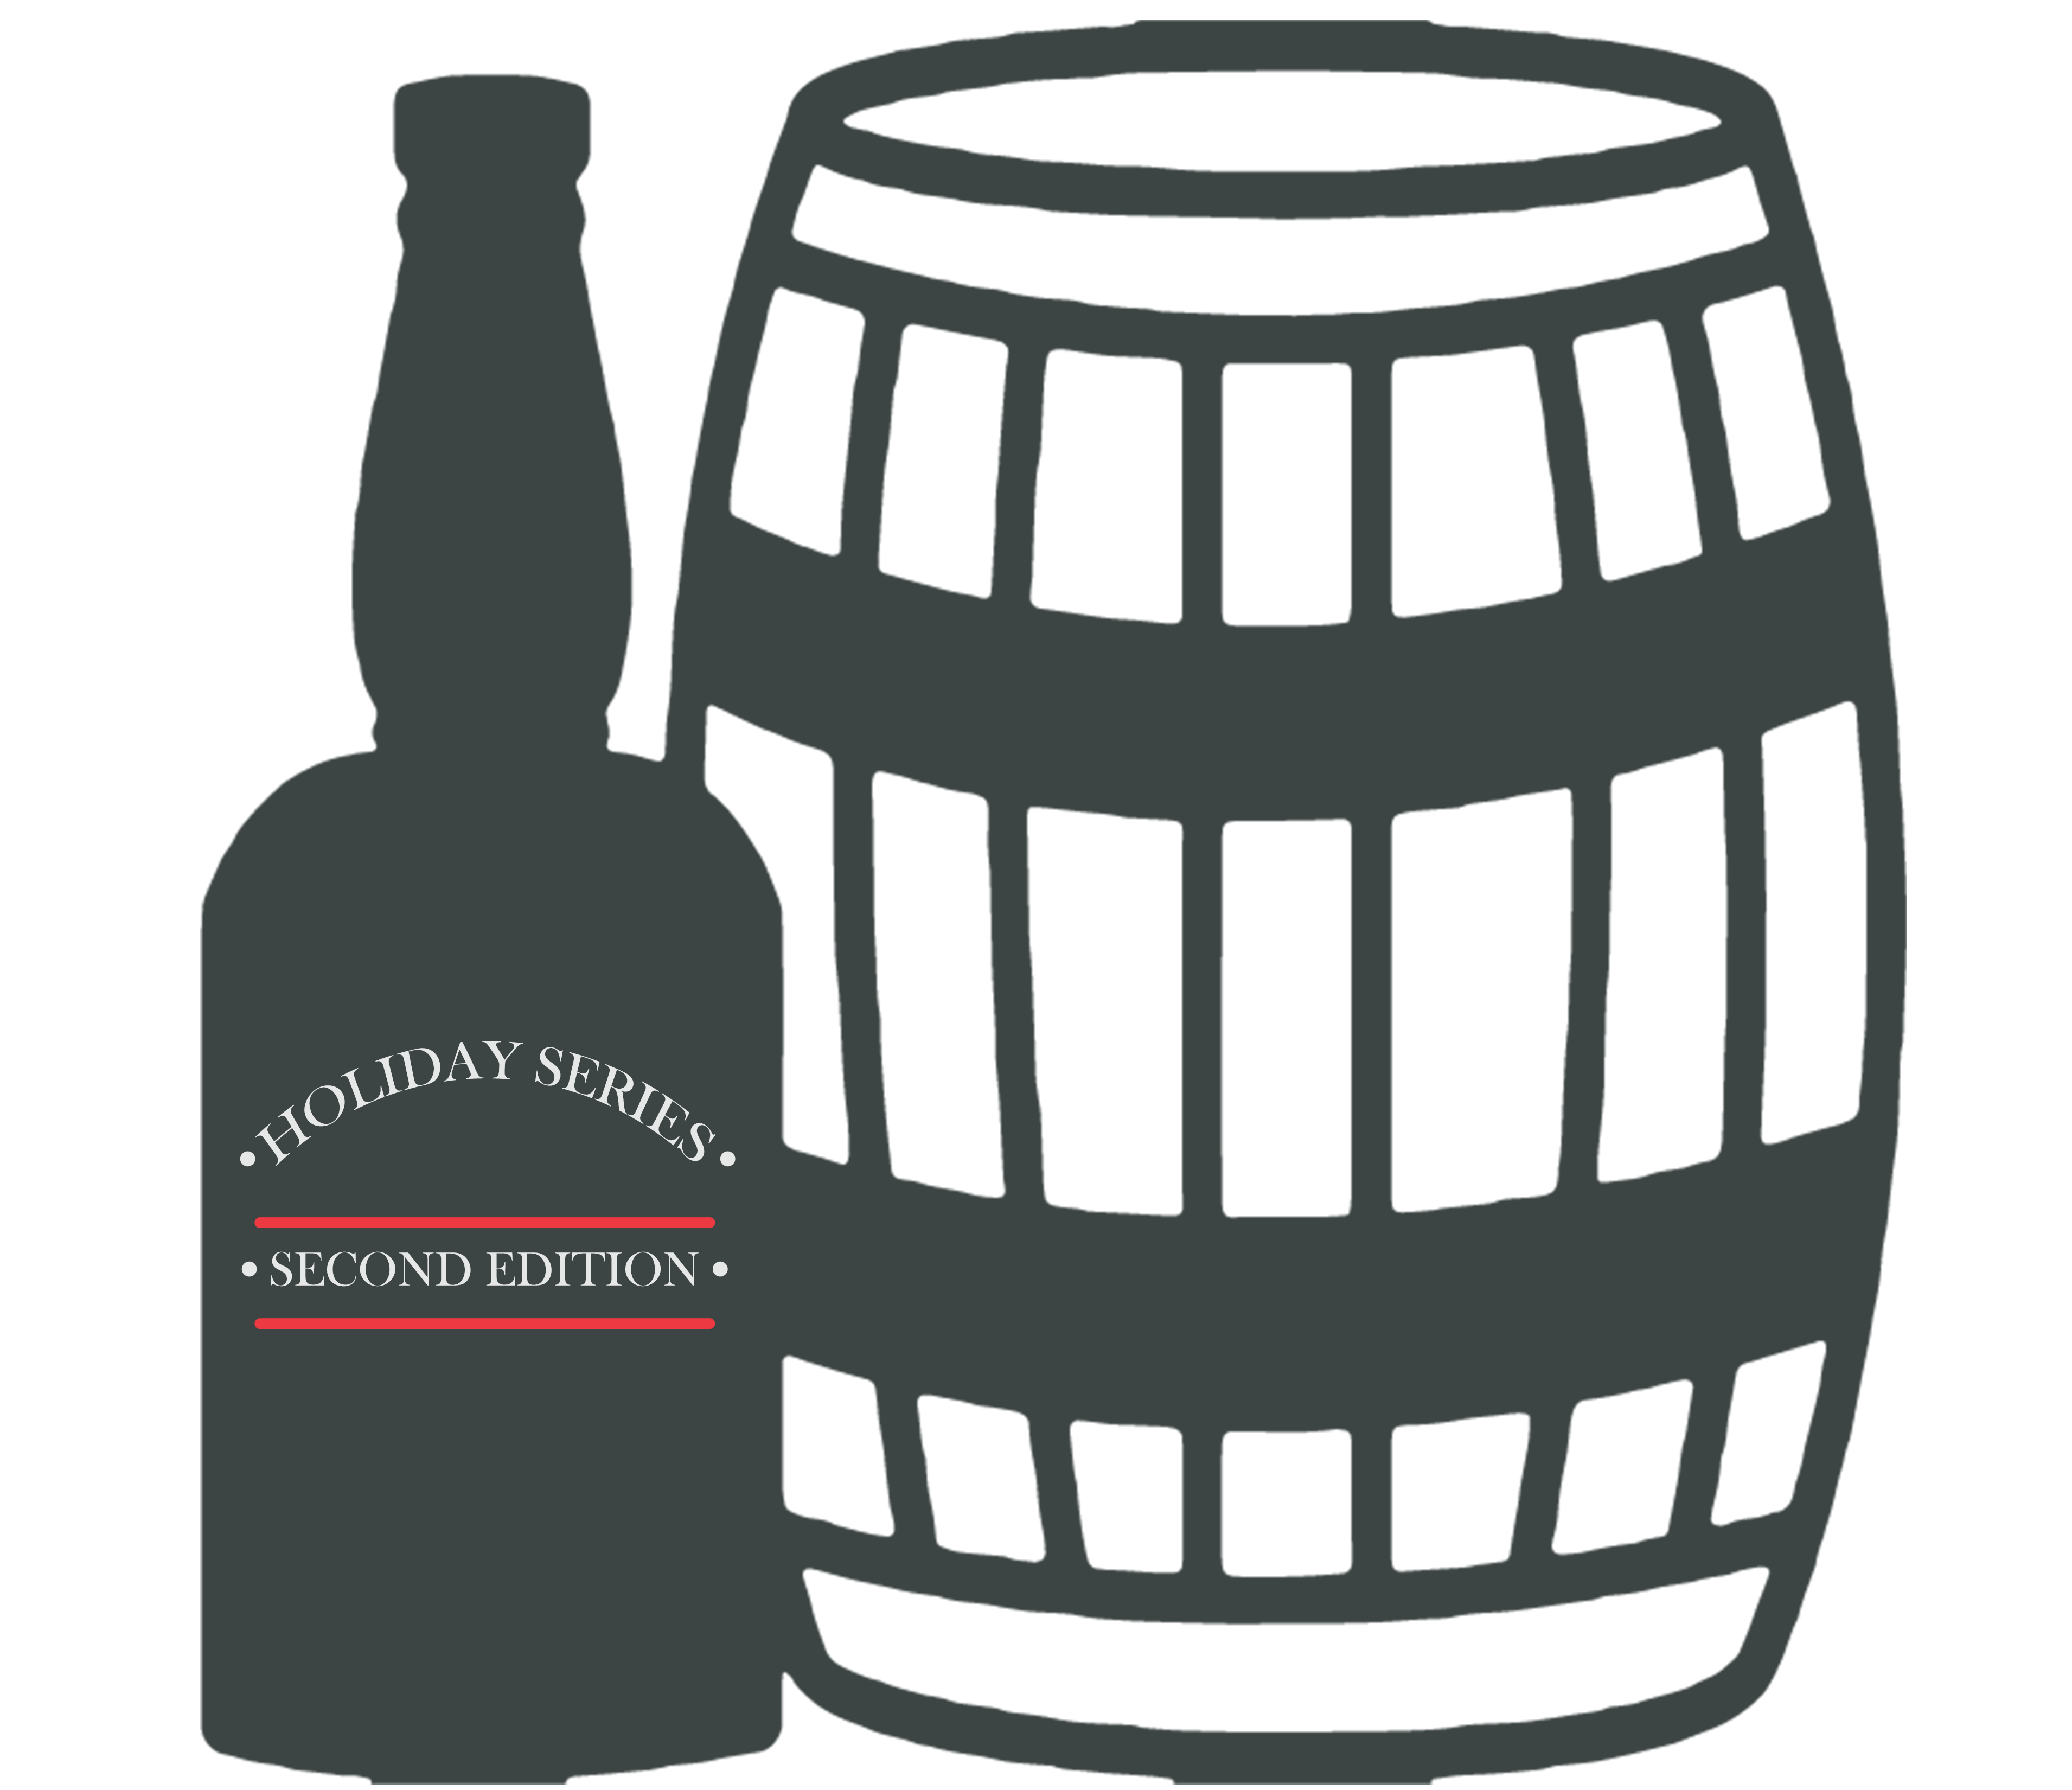 Illustration of bottle and barrel. bottle reads "Holiday Series" and below it "second edition"